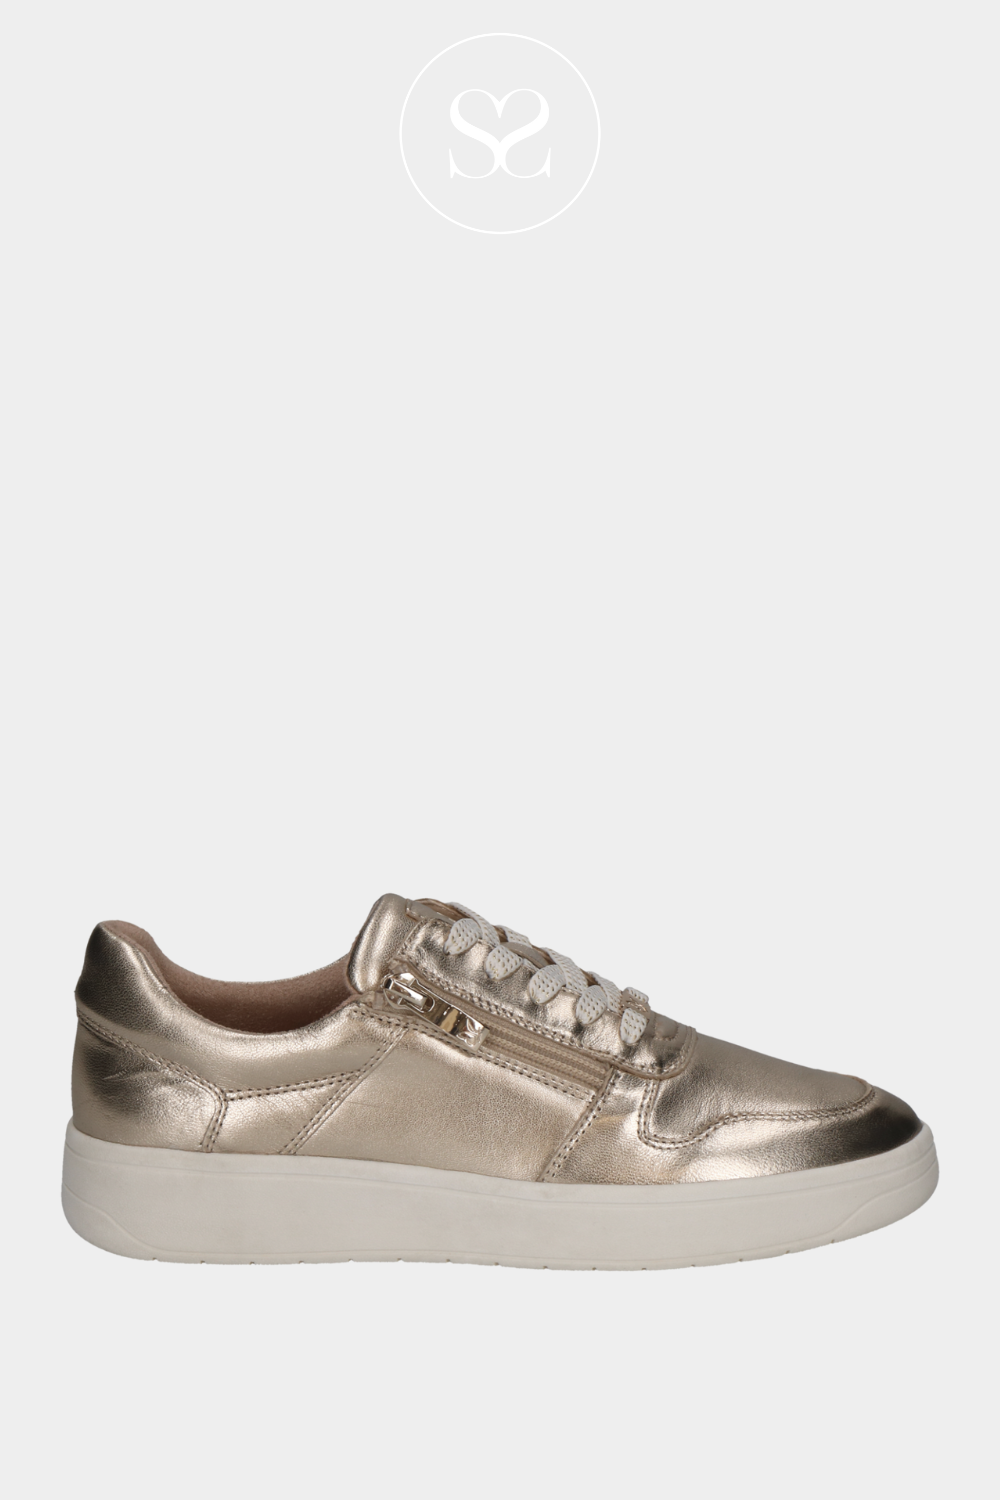 CAPRICE 9-23301-42 GOLD METALLIC LEATHER TRAINERS WITH ZIP AND LACE FASTENING. ON A WHITE SOLE. REMOVABLE INSOLE AND SUITABLE FOR WALKING.